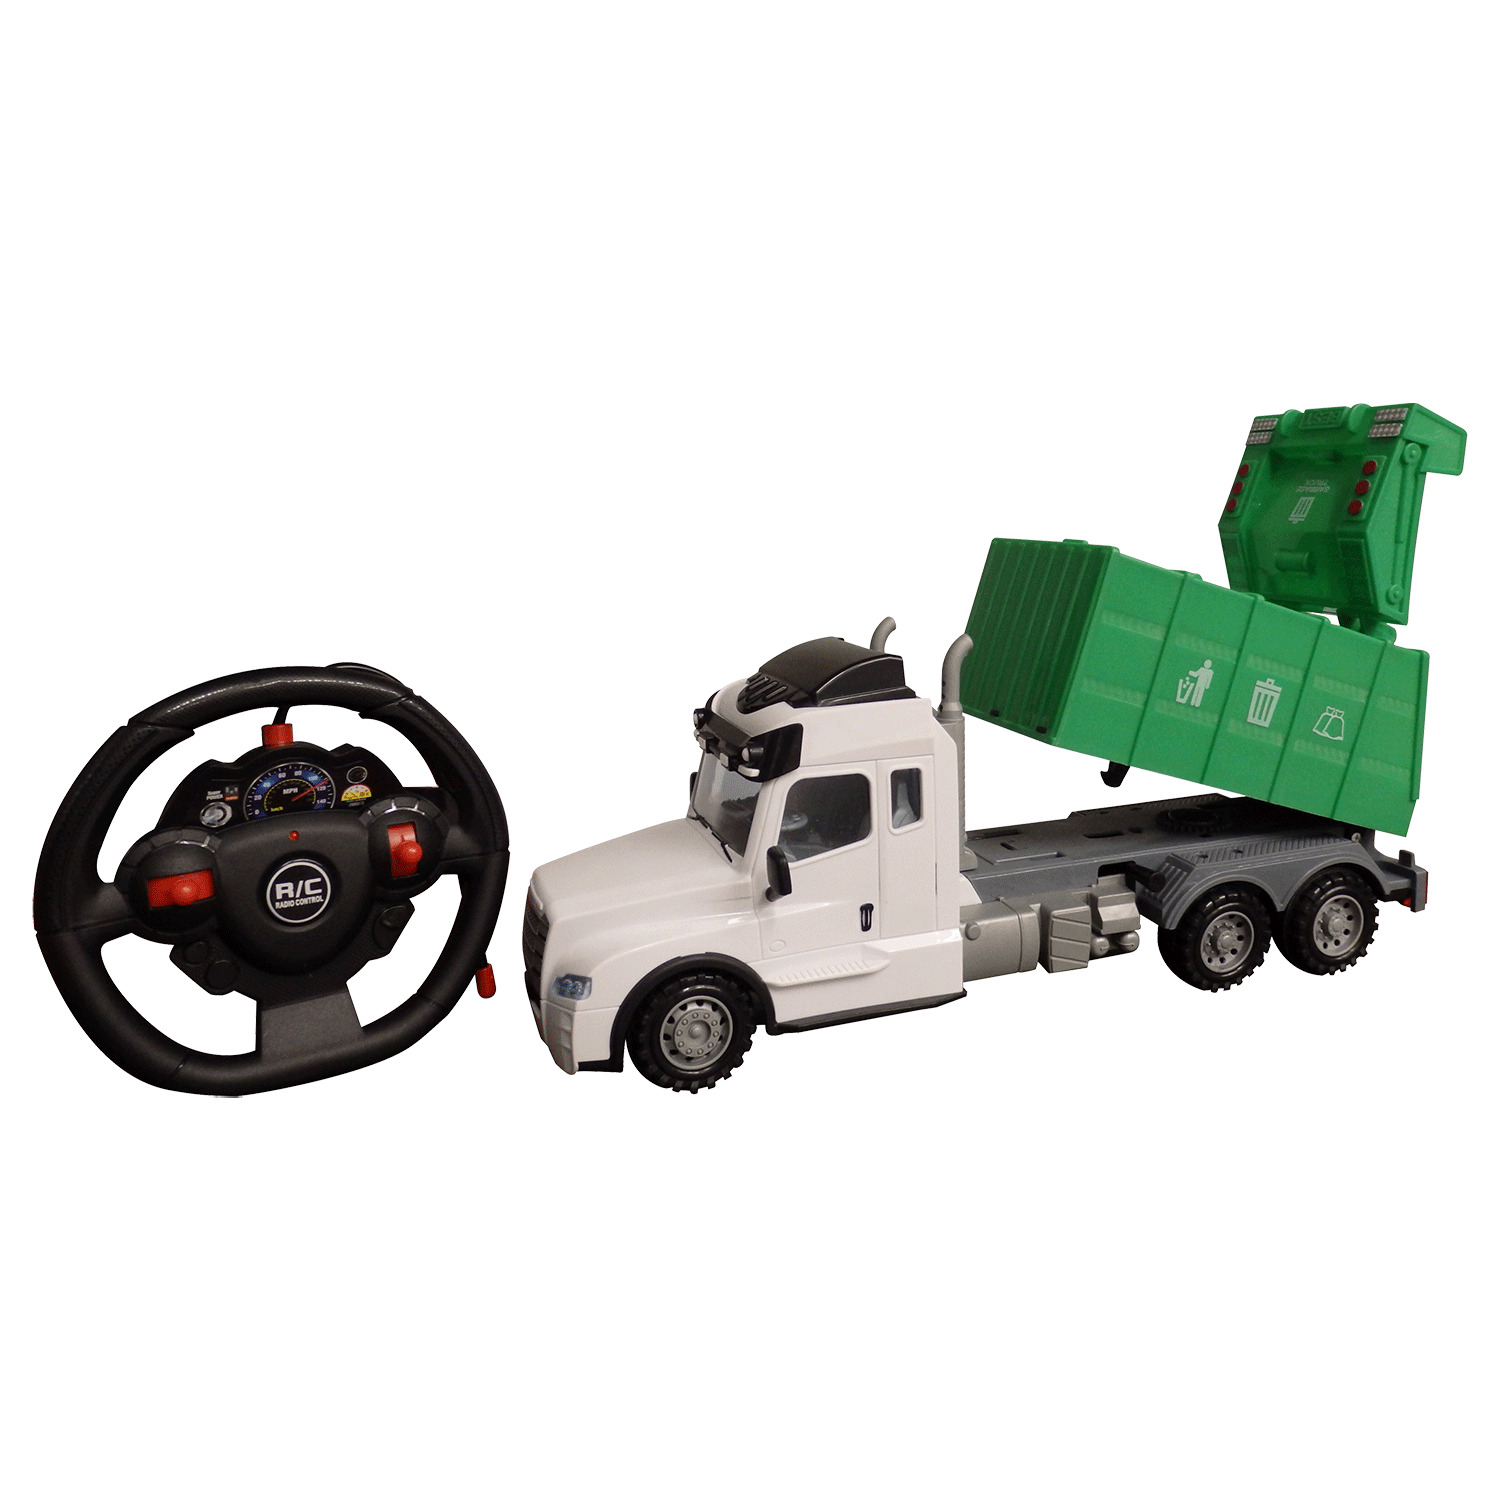 https://www.rossy.ca/media/A2W/products/camion-telecommande-rc-camion-a-ordures-50701-1.jpg